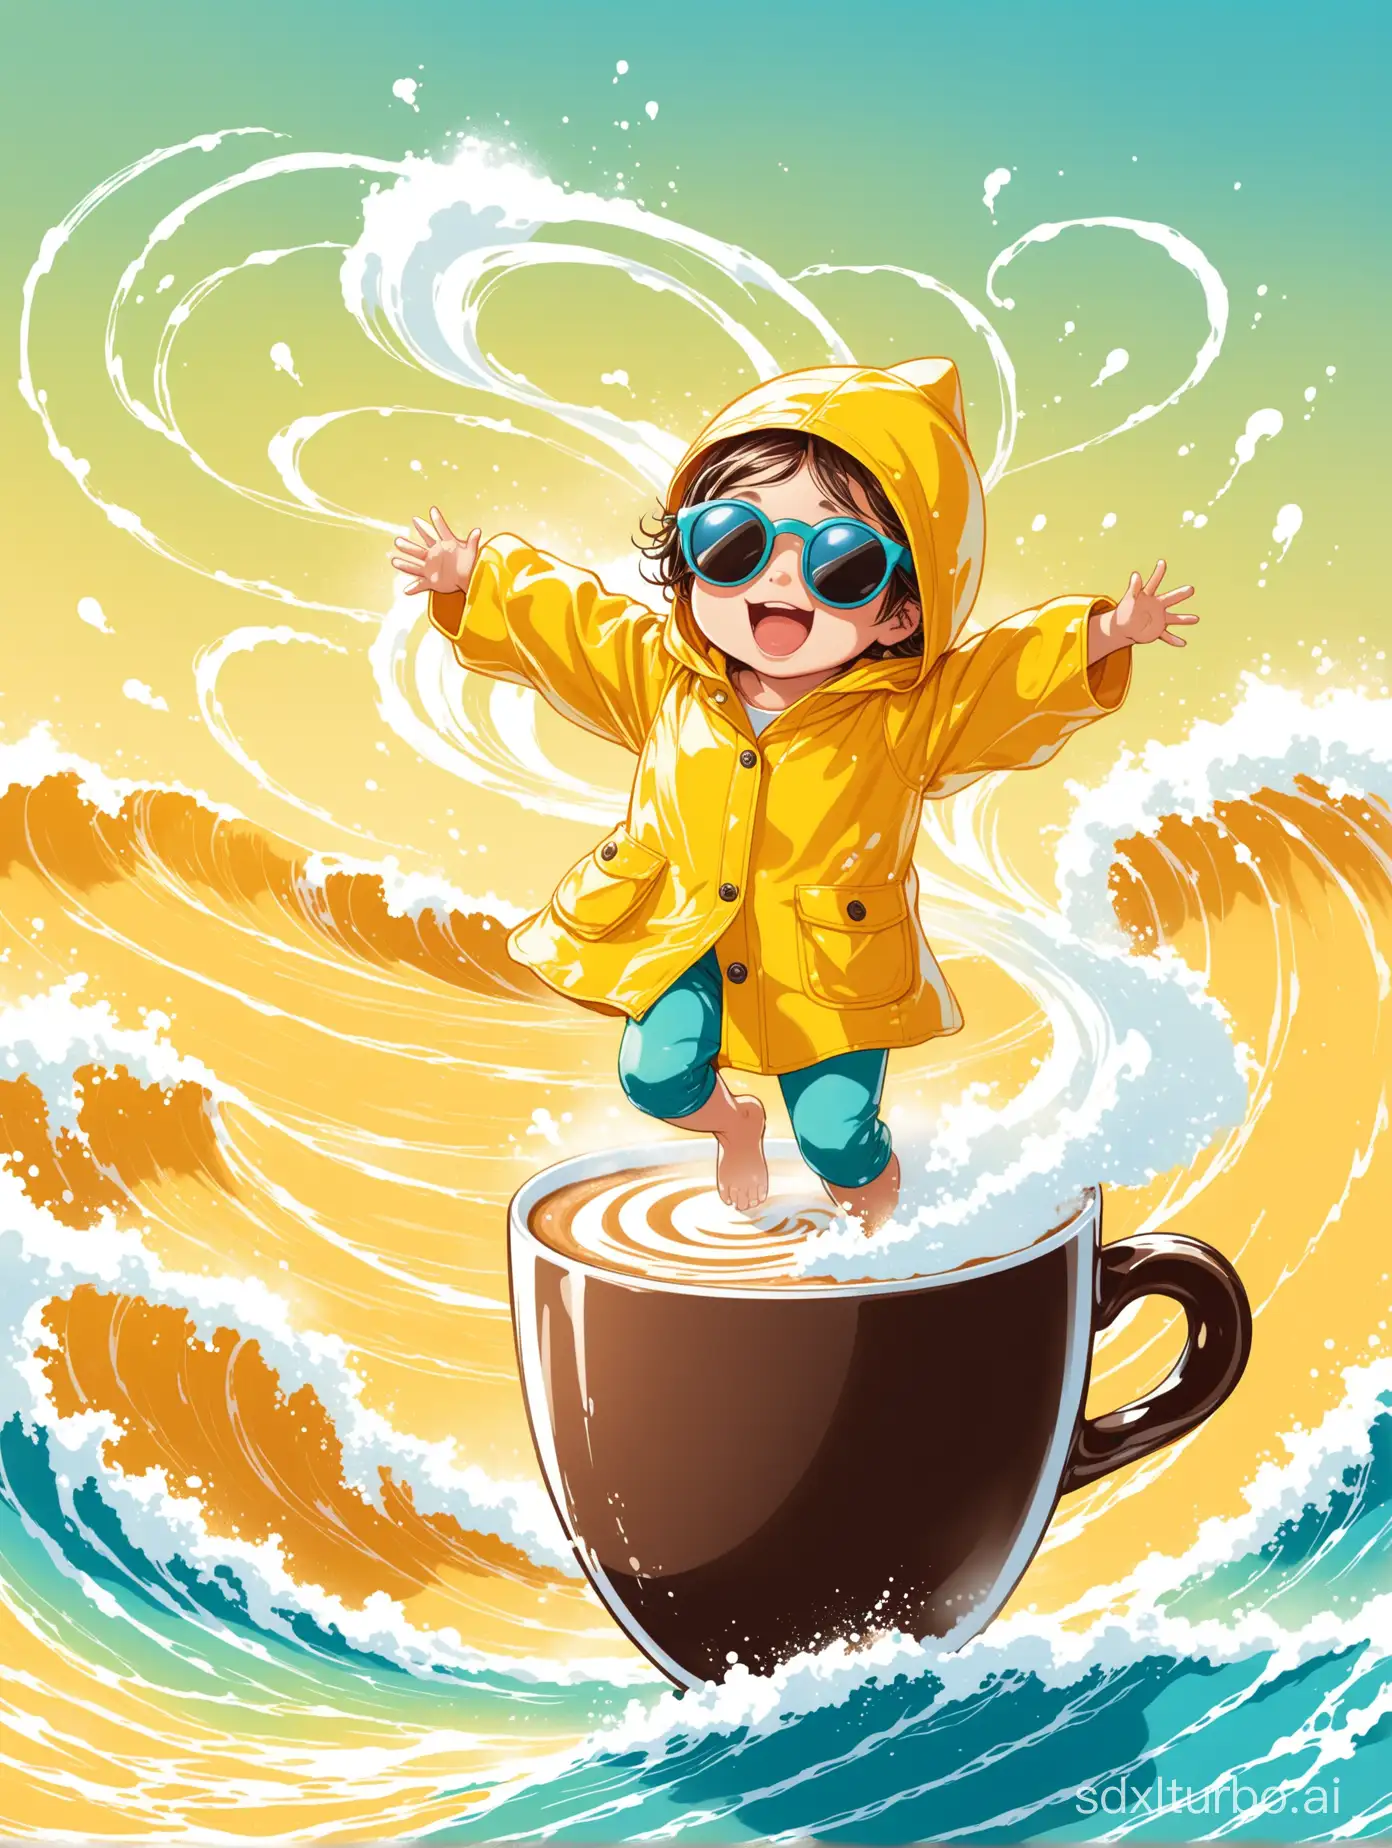 A small child, wearing a bright yellow raincoat and oversized sunglasses, gleefully surfs on a giant espresso cup. The cup is filled with swirling, frothy coffee, and trails of steam create whimsical shapes in the air. The child's laughter echoes as they ride the wave, leaving a trail of coffee foam in their wake.